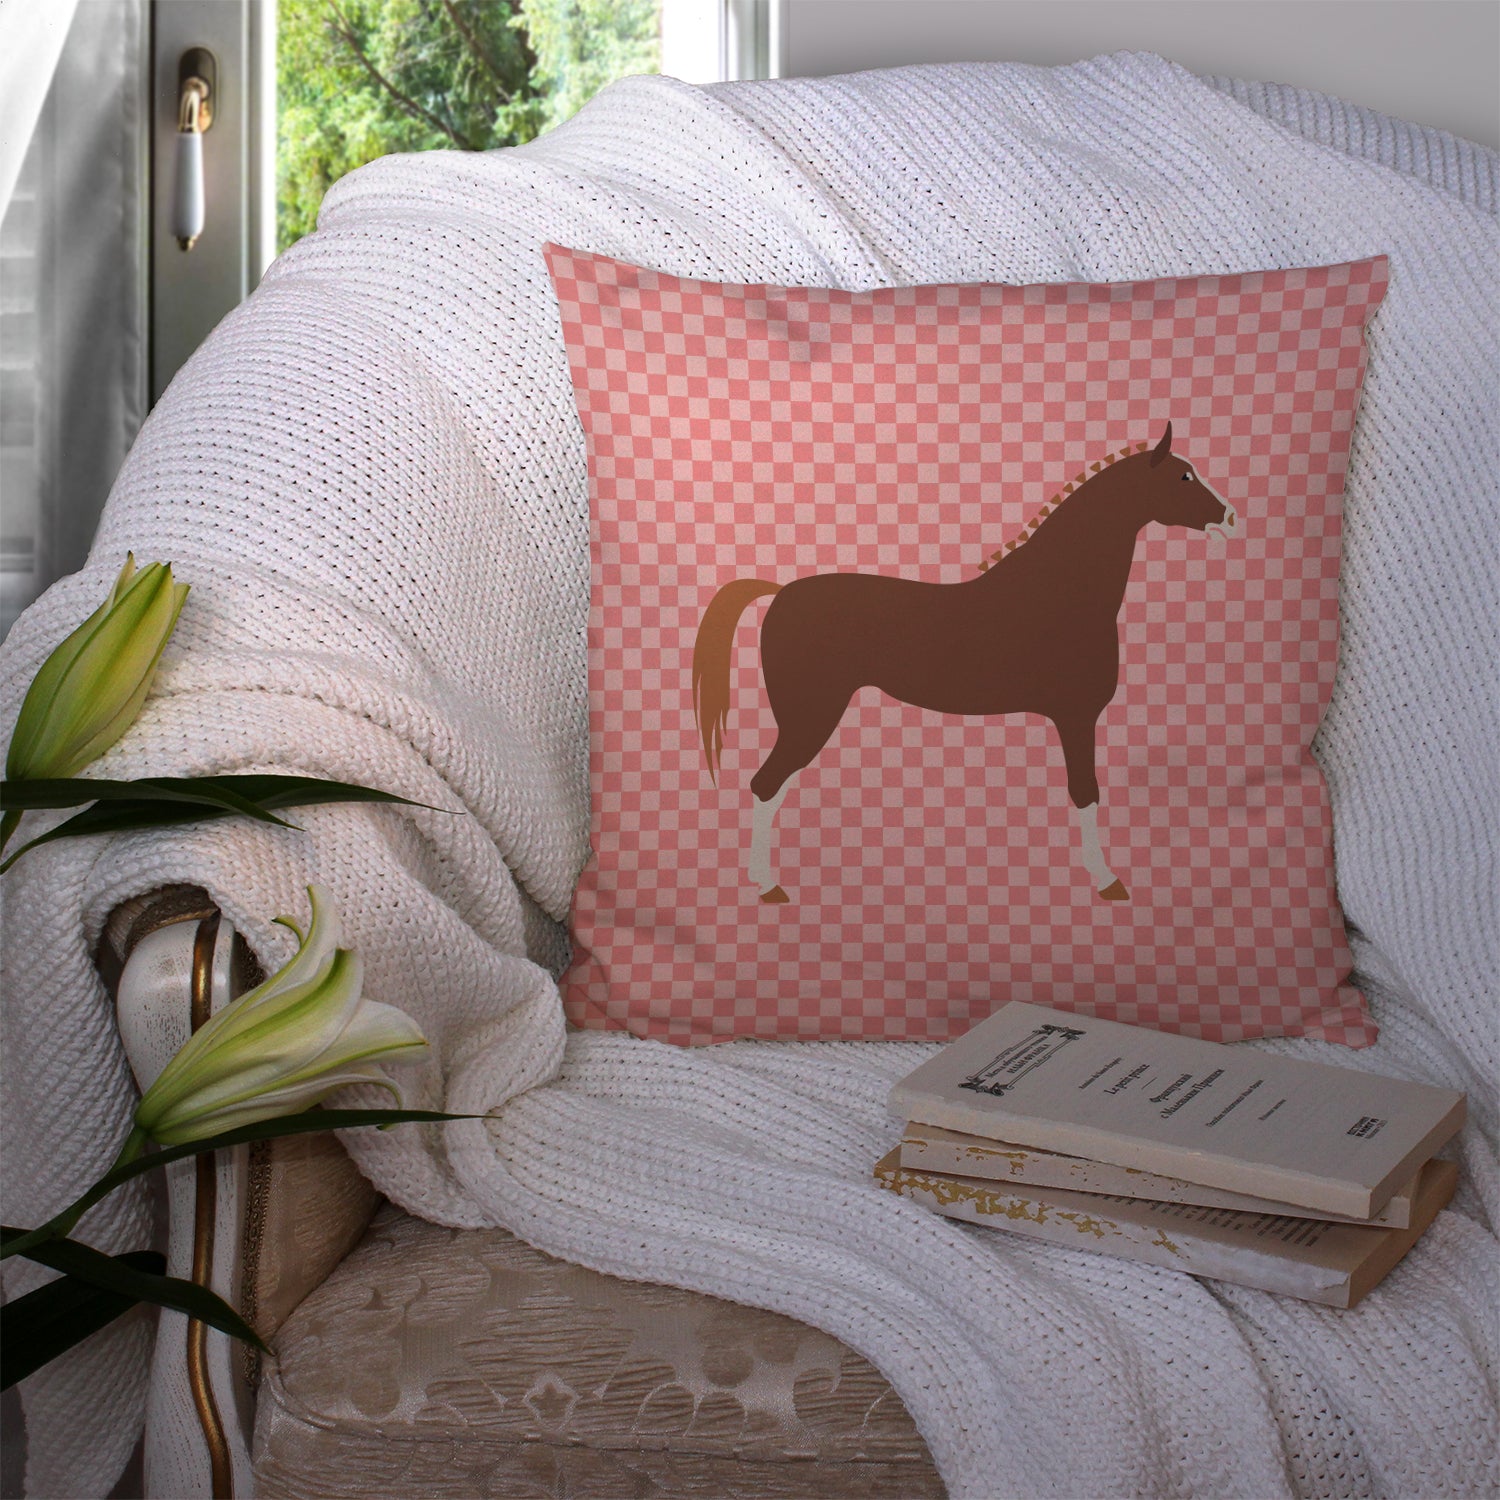 Hannoverian Horse Pink Check Fabric Decorative Pillow BB7909PW1414 - the-store.com